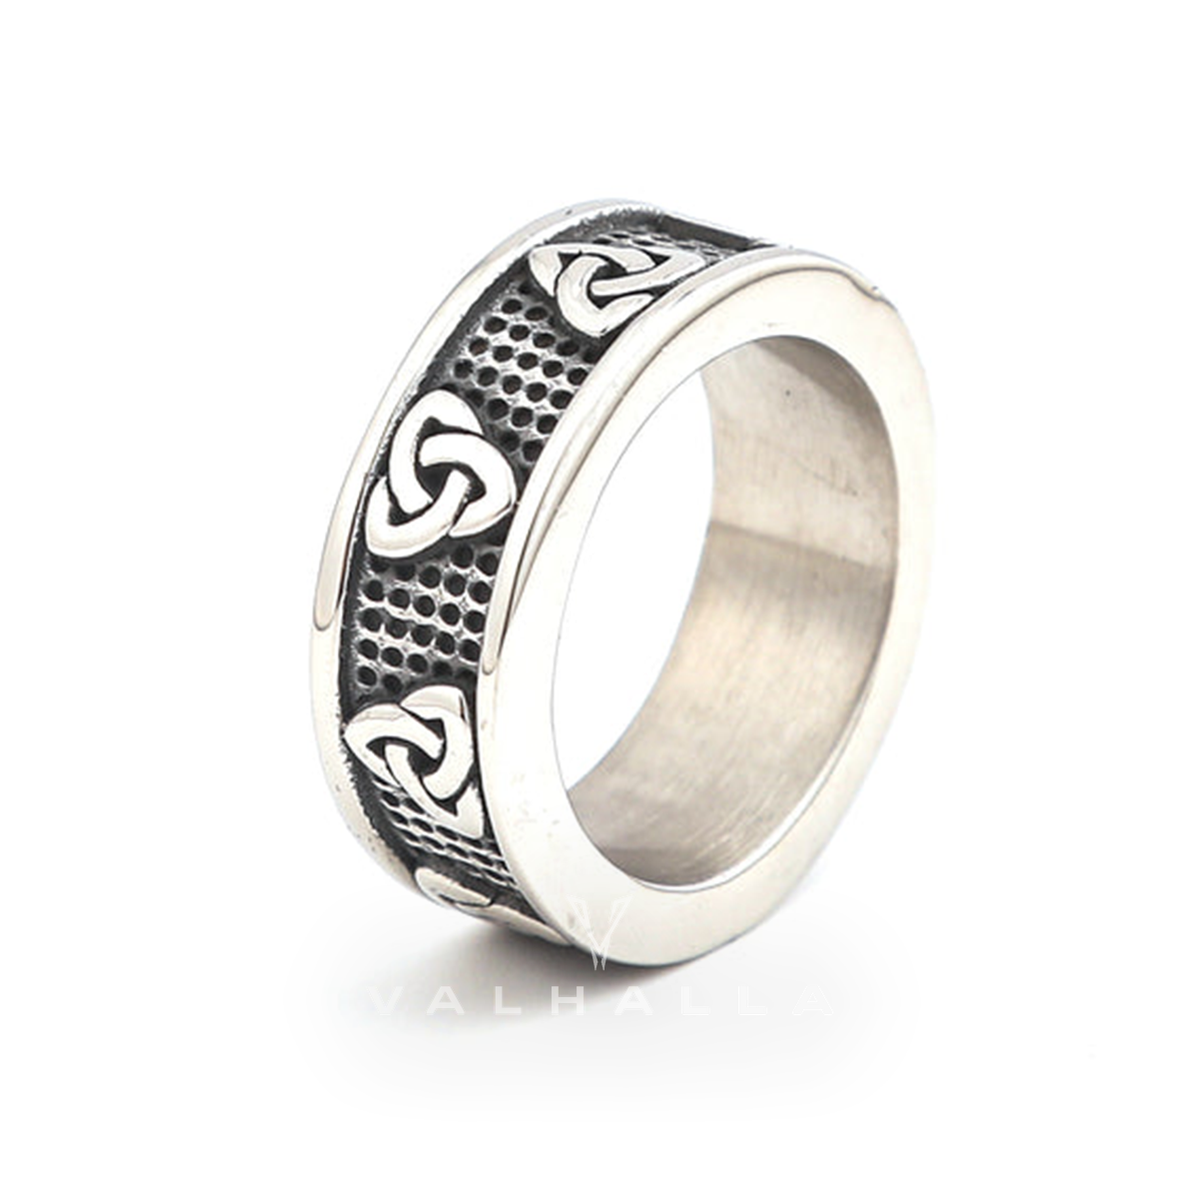 Handcrafted Stainless Steel Celtic Triquetra Band Ring